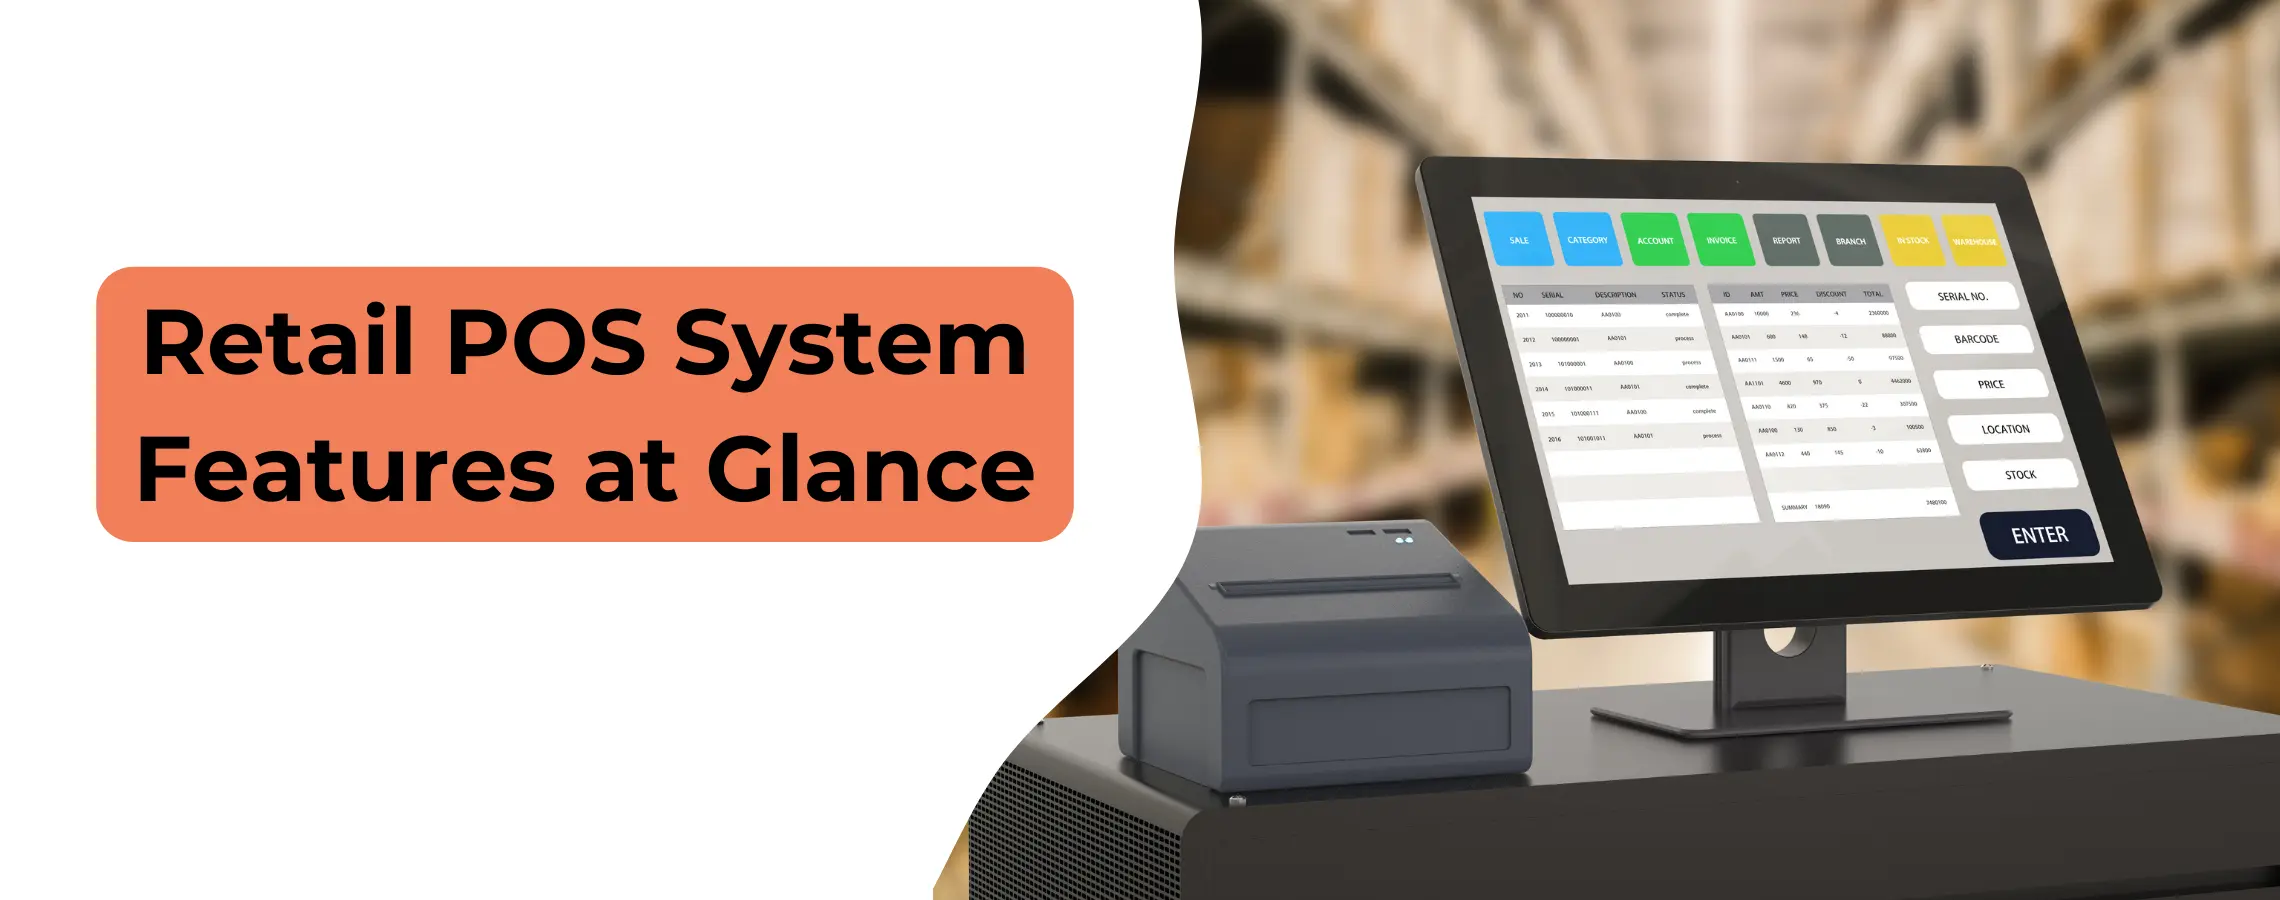 Retail POS System Features at Glance